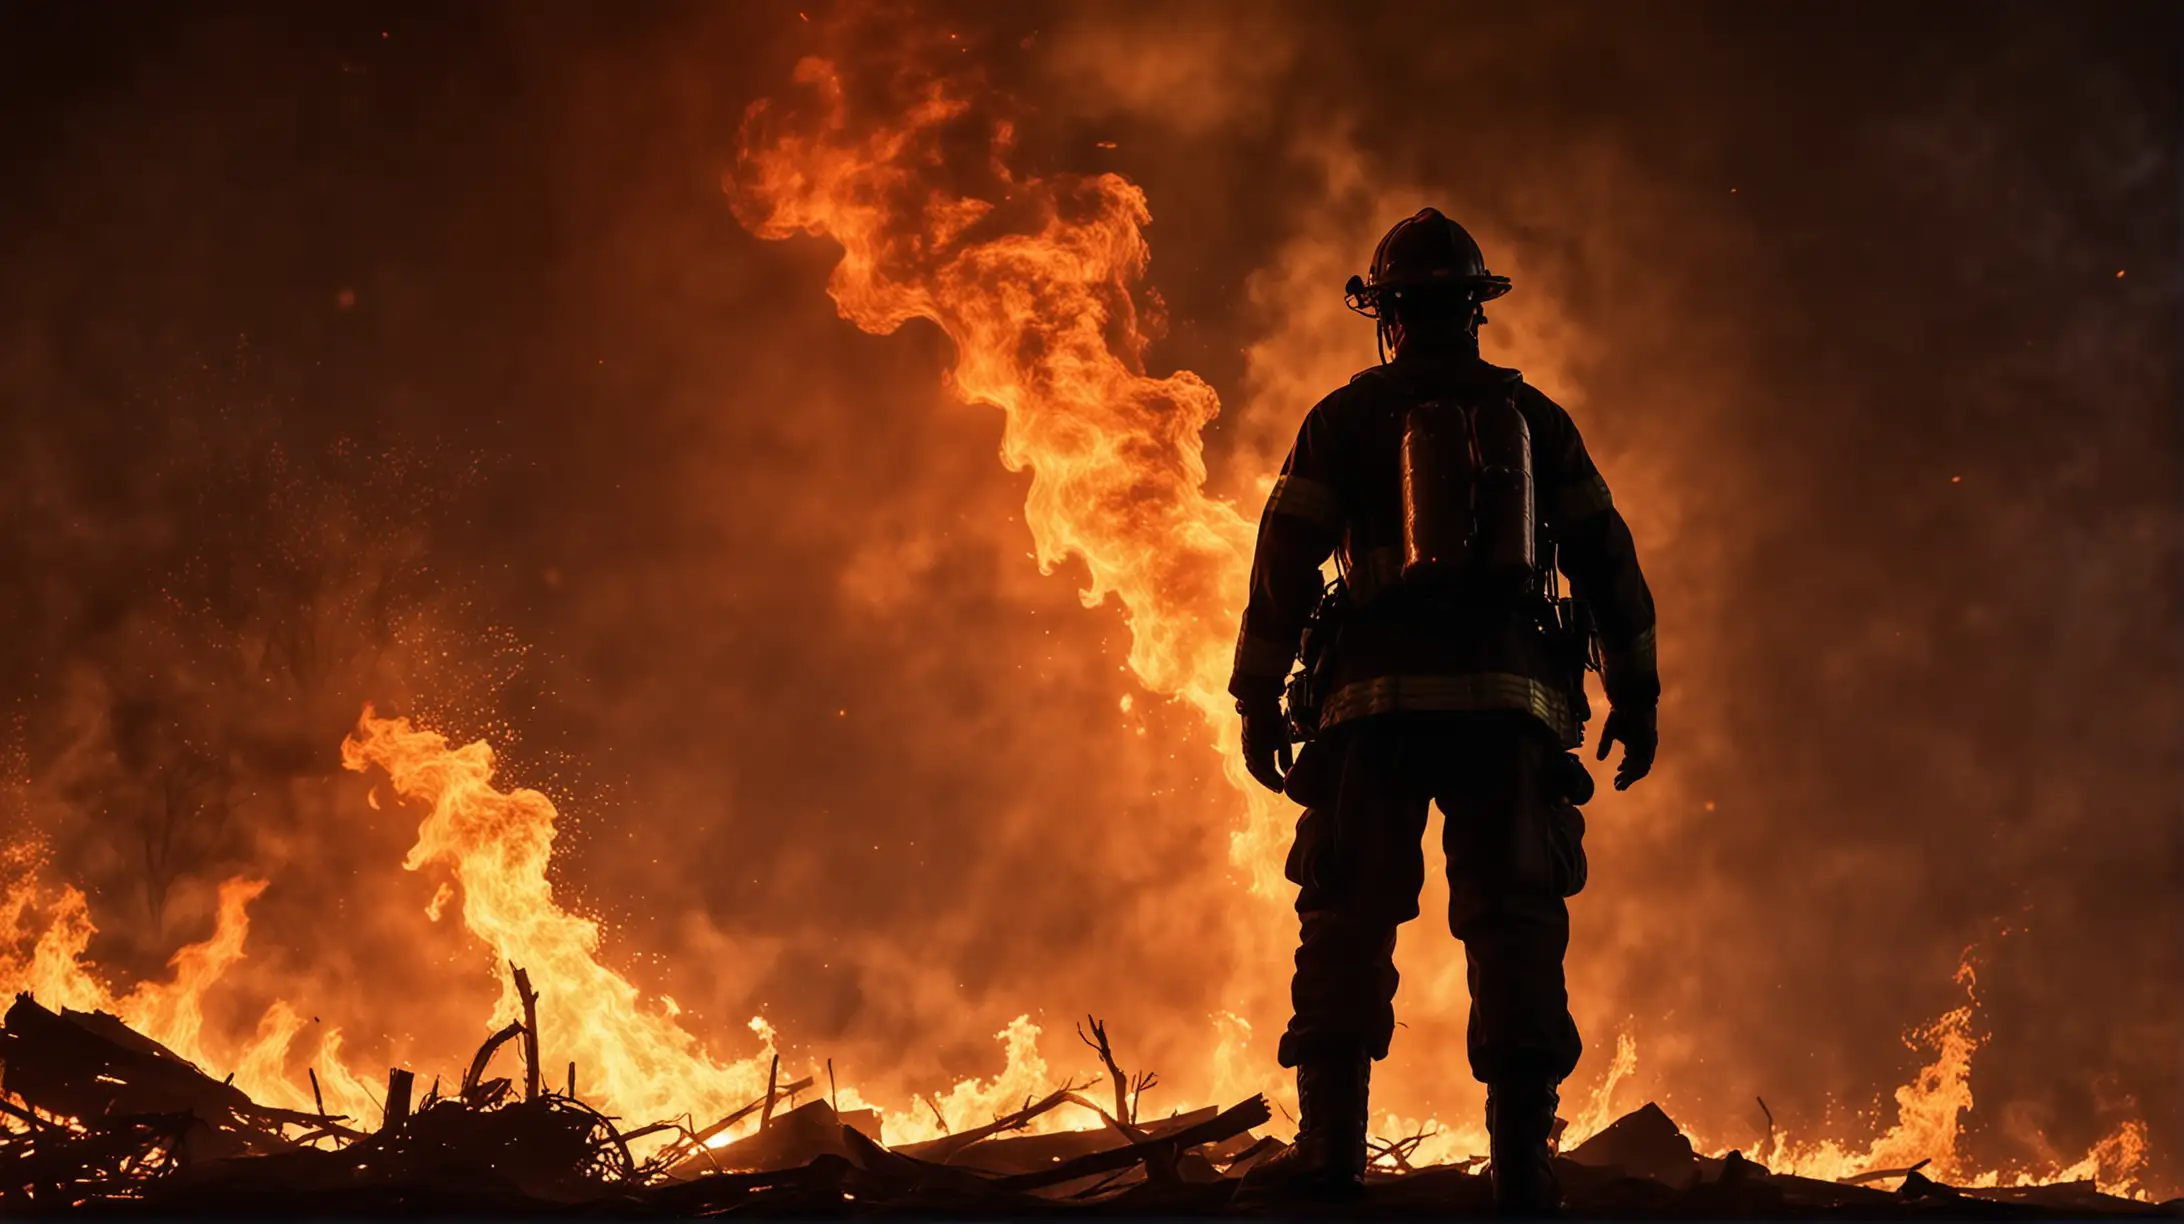 A brave fireman stands tall amidst the raging inferno, his silhouette illuminated by the flickering flames. The intense heat and smoke only add to the intensity of the scene, as he heroically saves lives and battles against the destructive force of nature.

